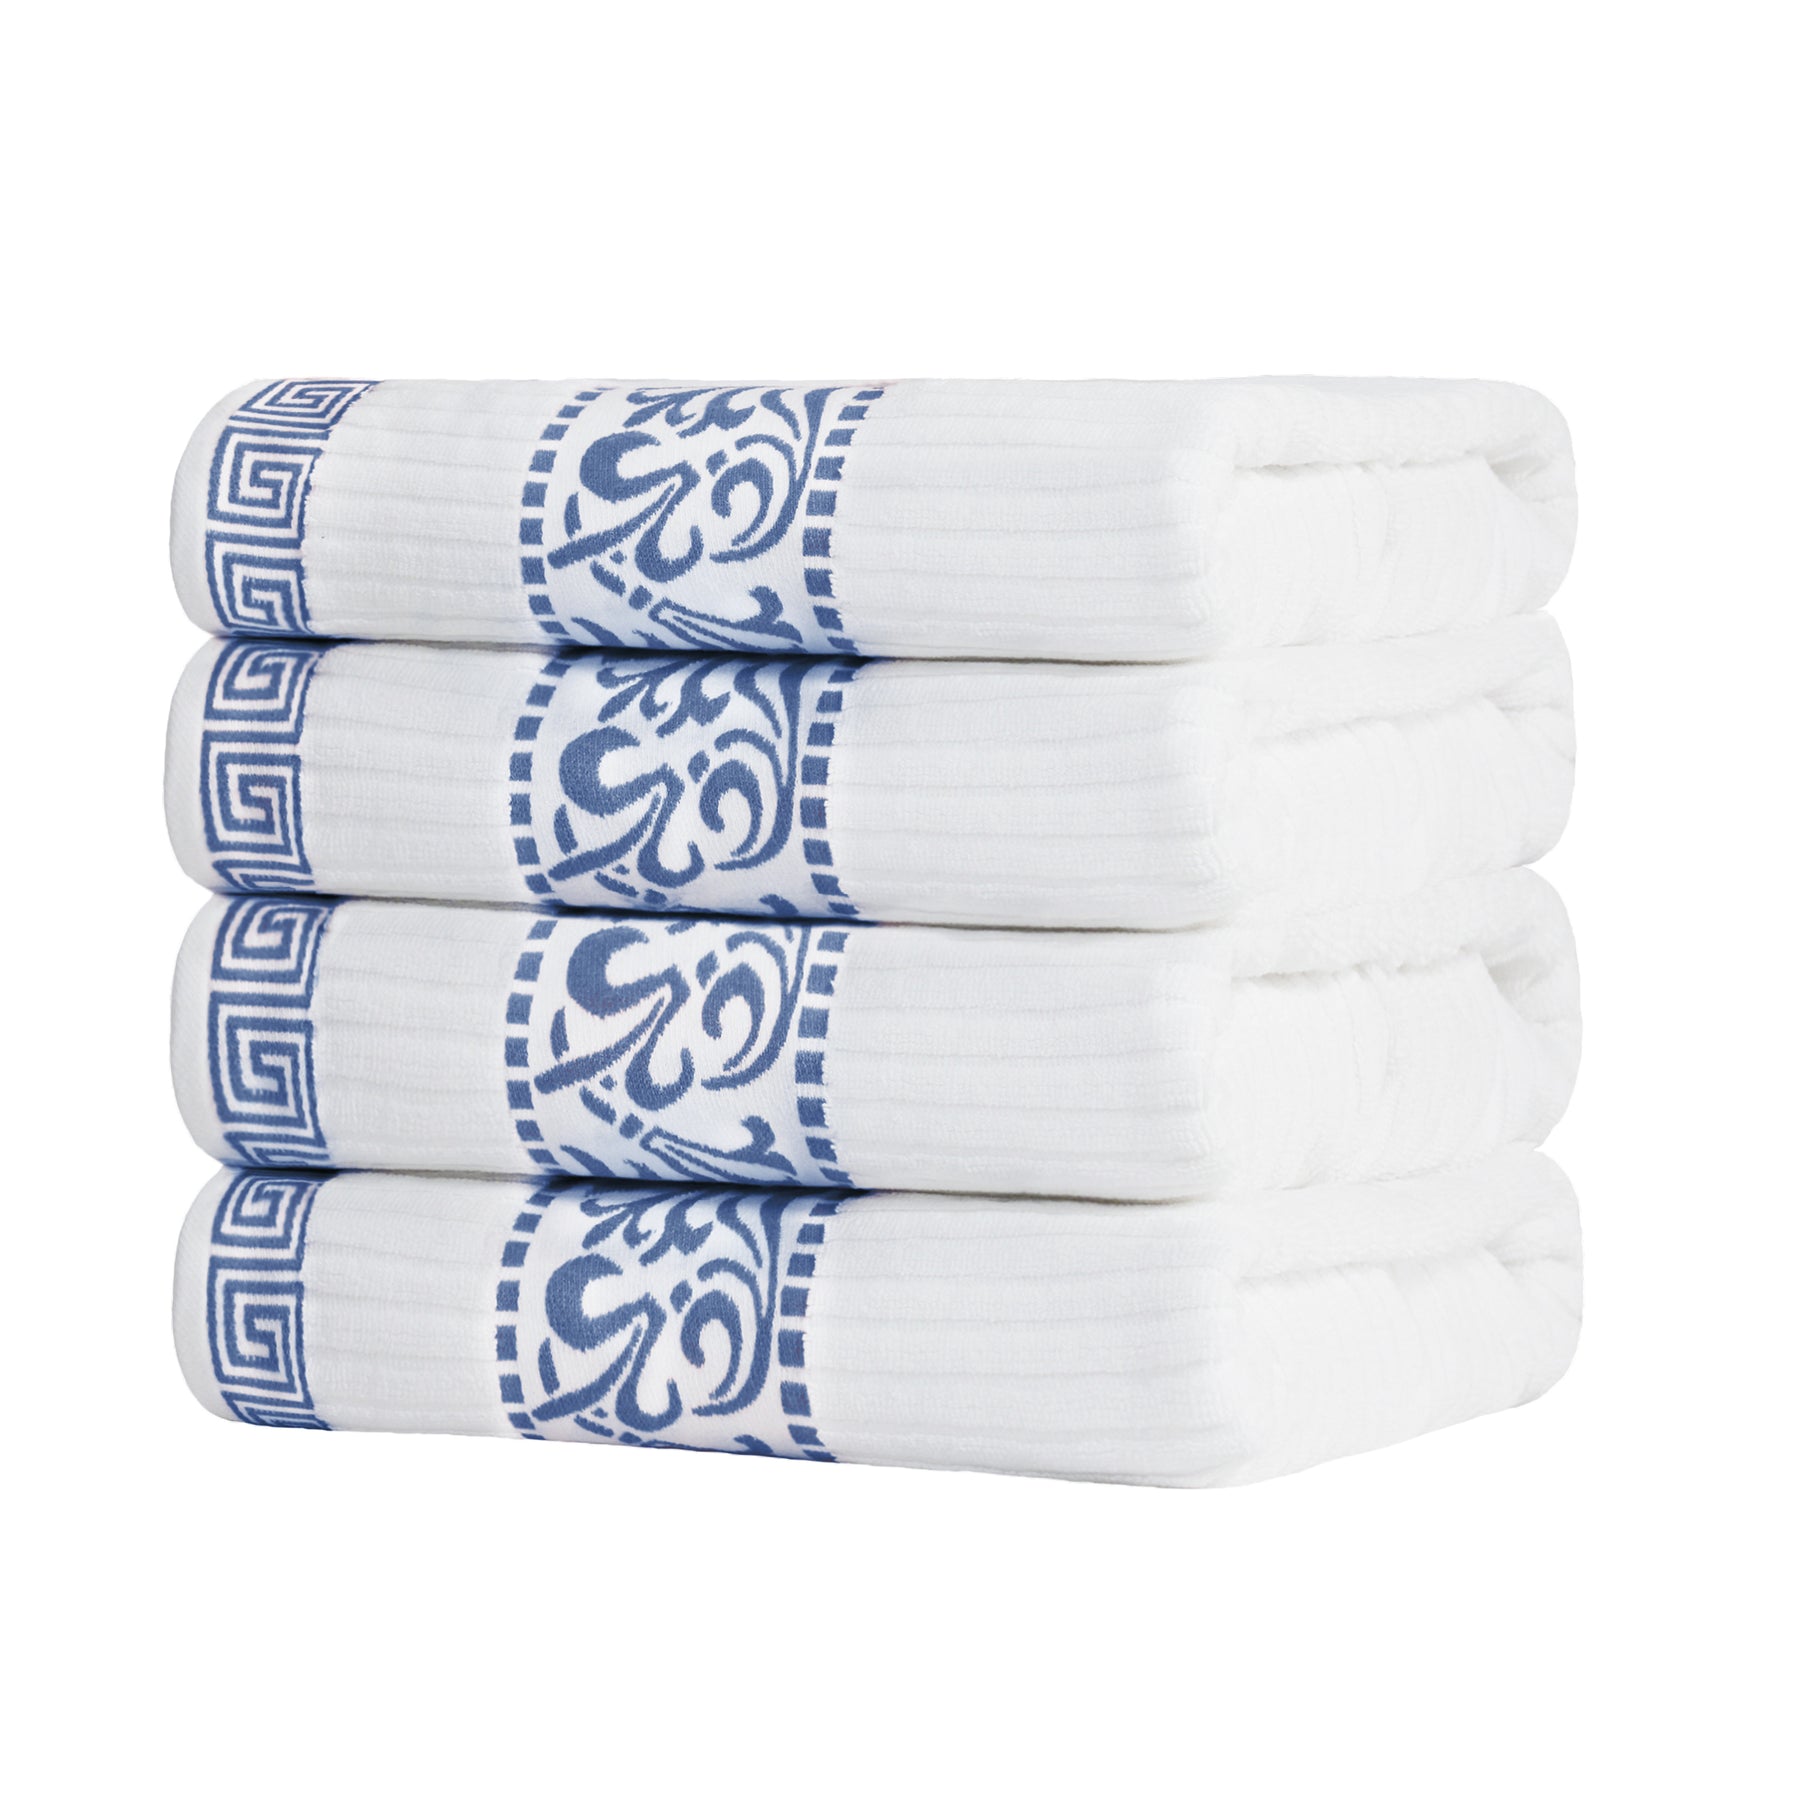 Superior Athens Cotton 4-Piece Bath Towel Set with Greek Scroll and Floral Pattern - Navy Blue